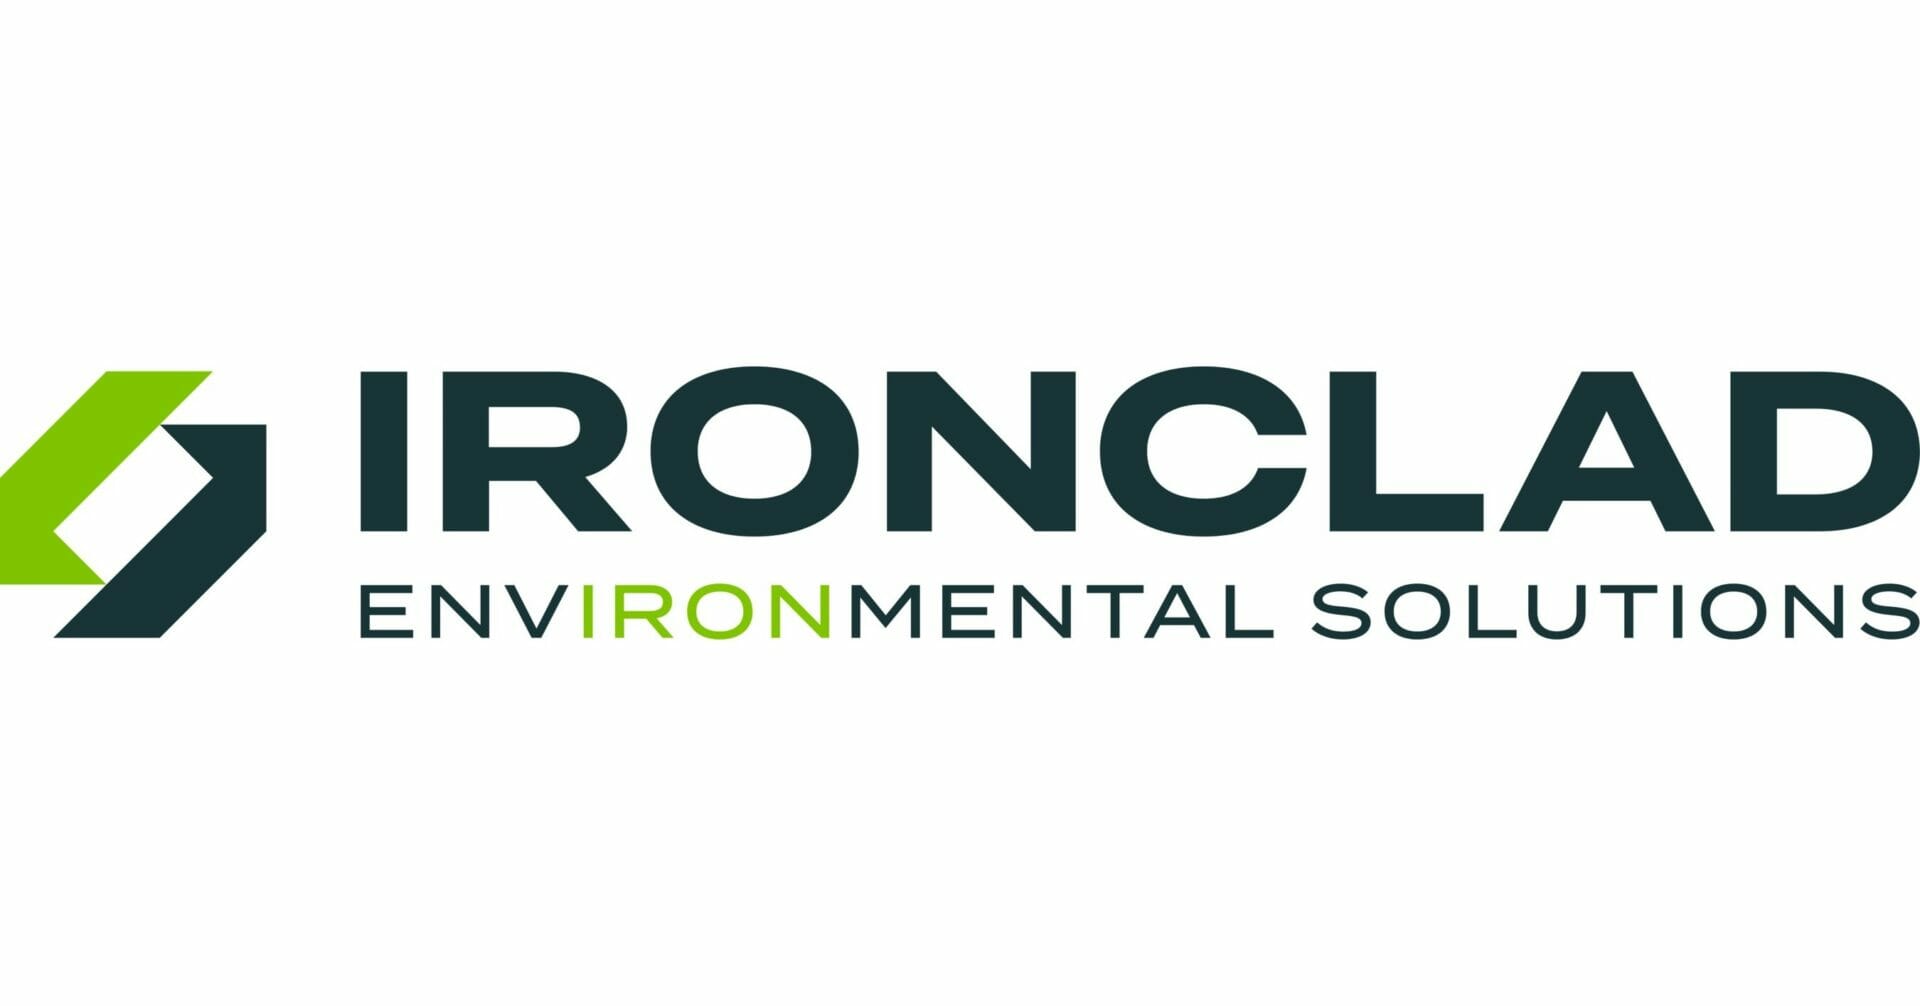 Mobile Mini Tank and Pump Solutions relaunches business as Ironclad Environmental Solutions to deliver expanded waste management service and far-reaching specialty waste containment solutions